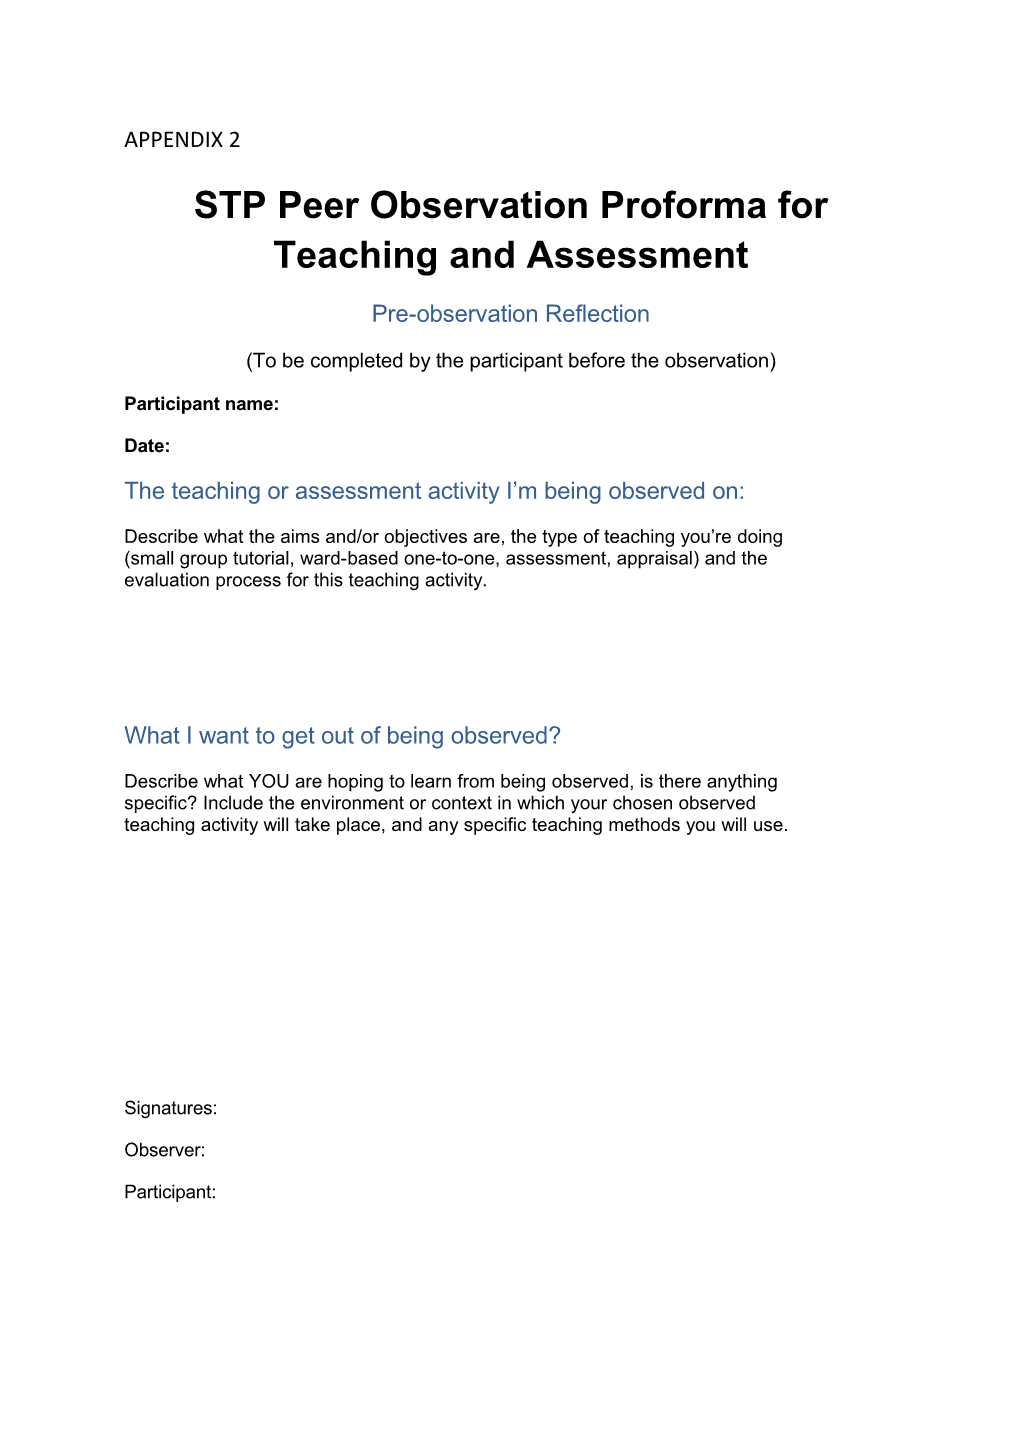 STP Peer Observation Proforma for Teaching and Assessment